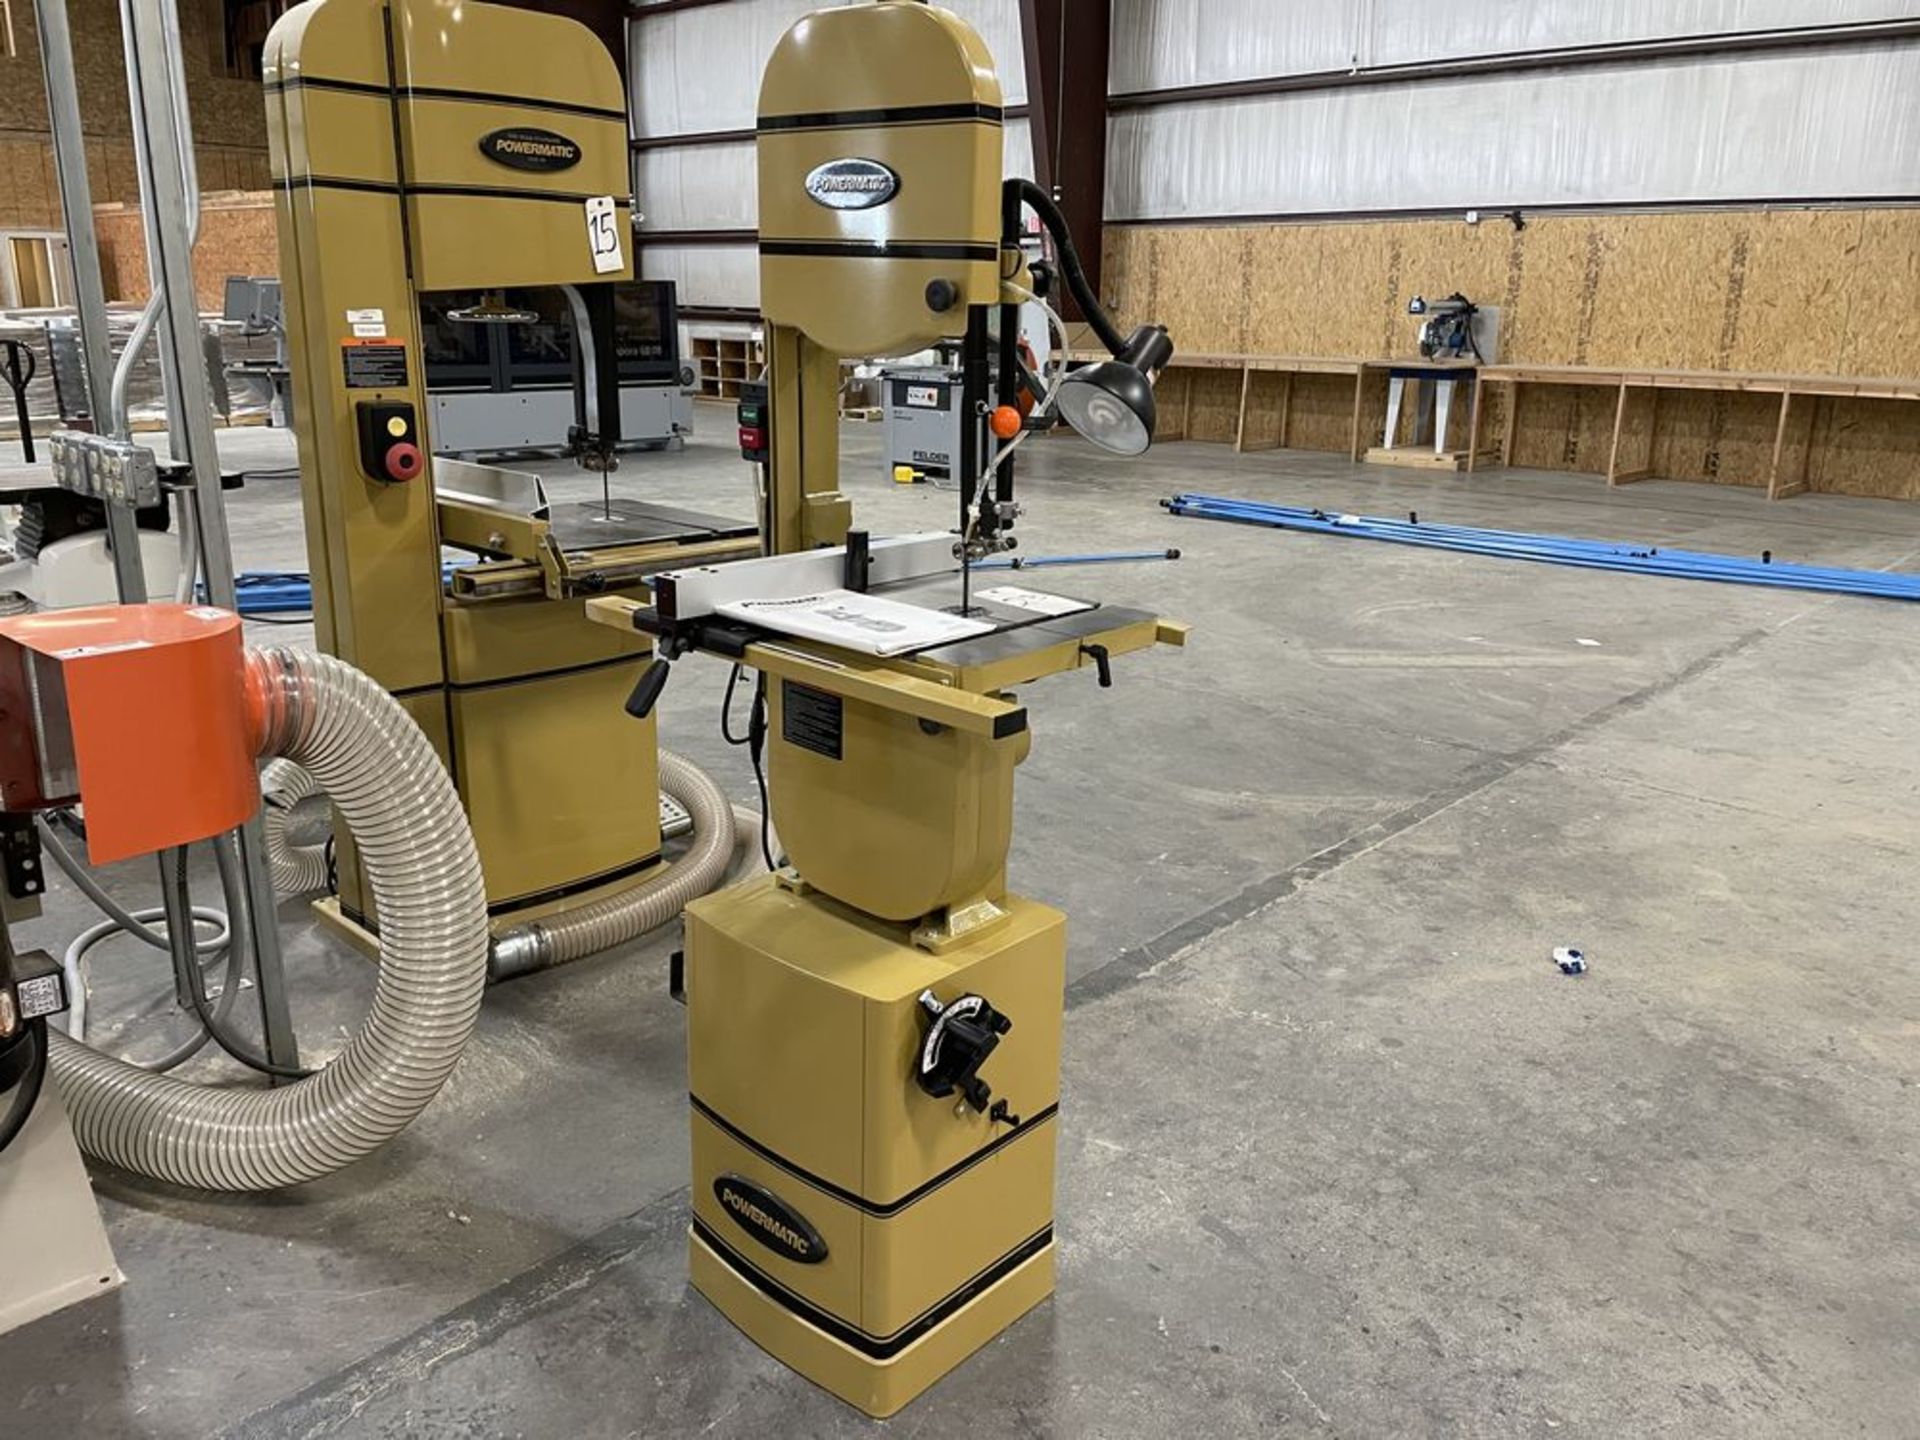 2019 Powermatic PWBS-14 14" Vertical Bandsaw. SN 19120769, Year 2019. Equipped with 1.5 HP motor,